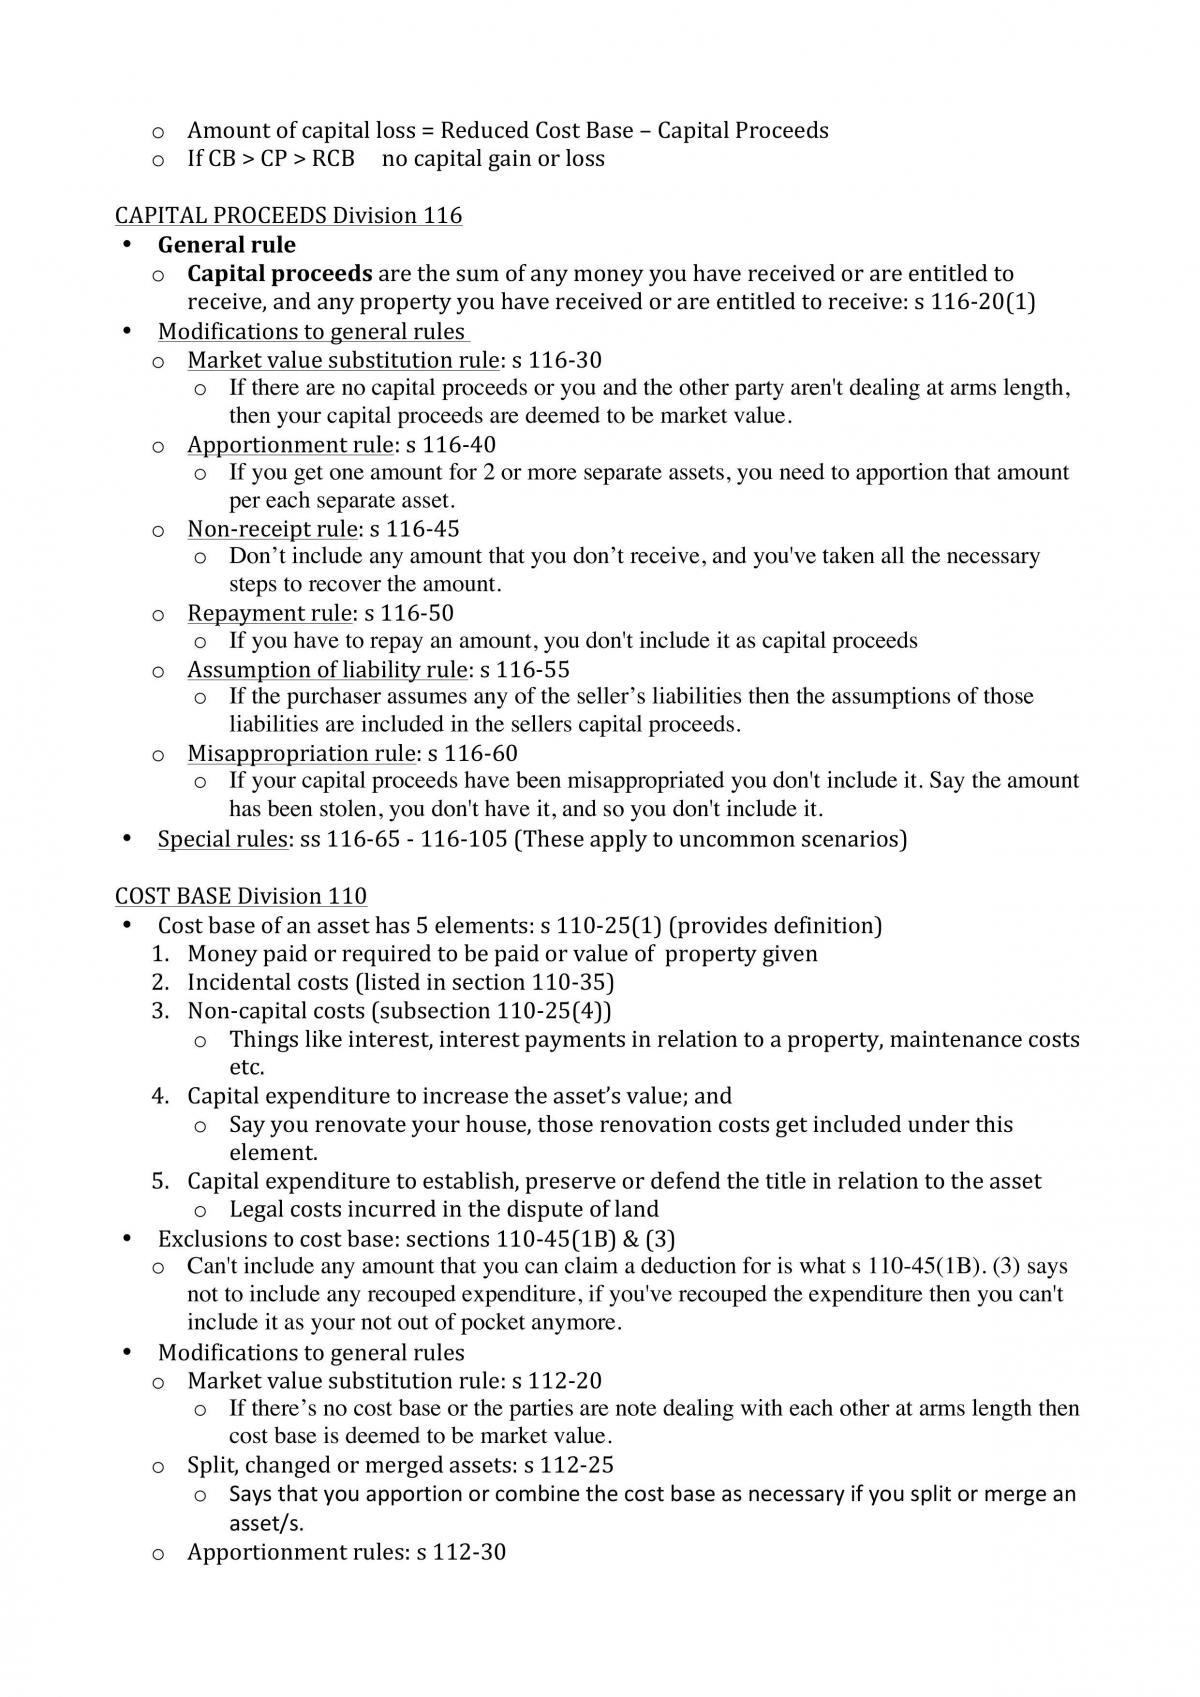 Subject Notes for BLAW30002 Taxation Law I - Page 25